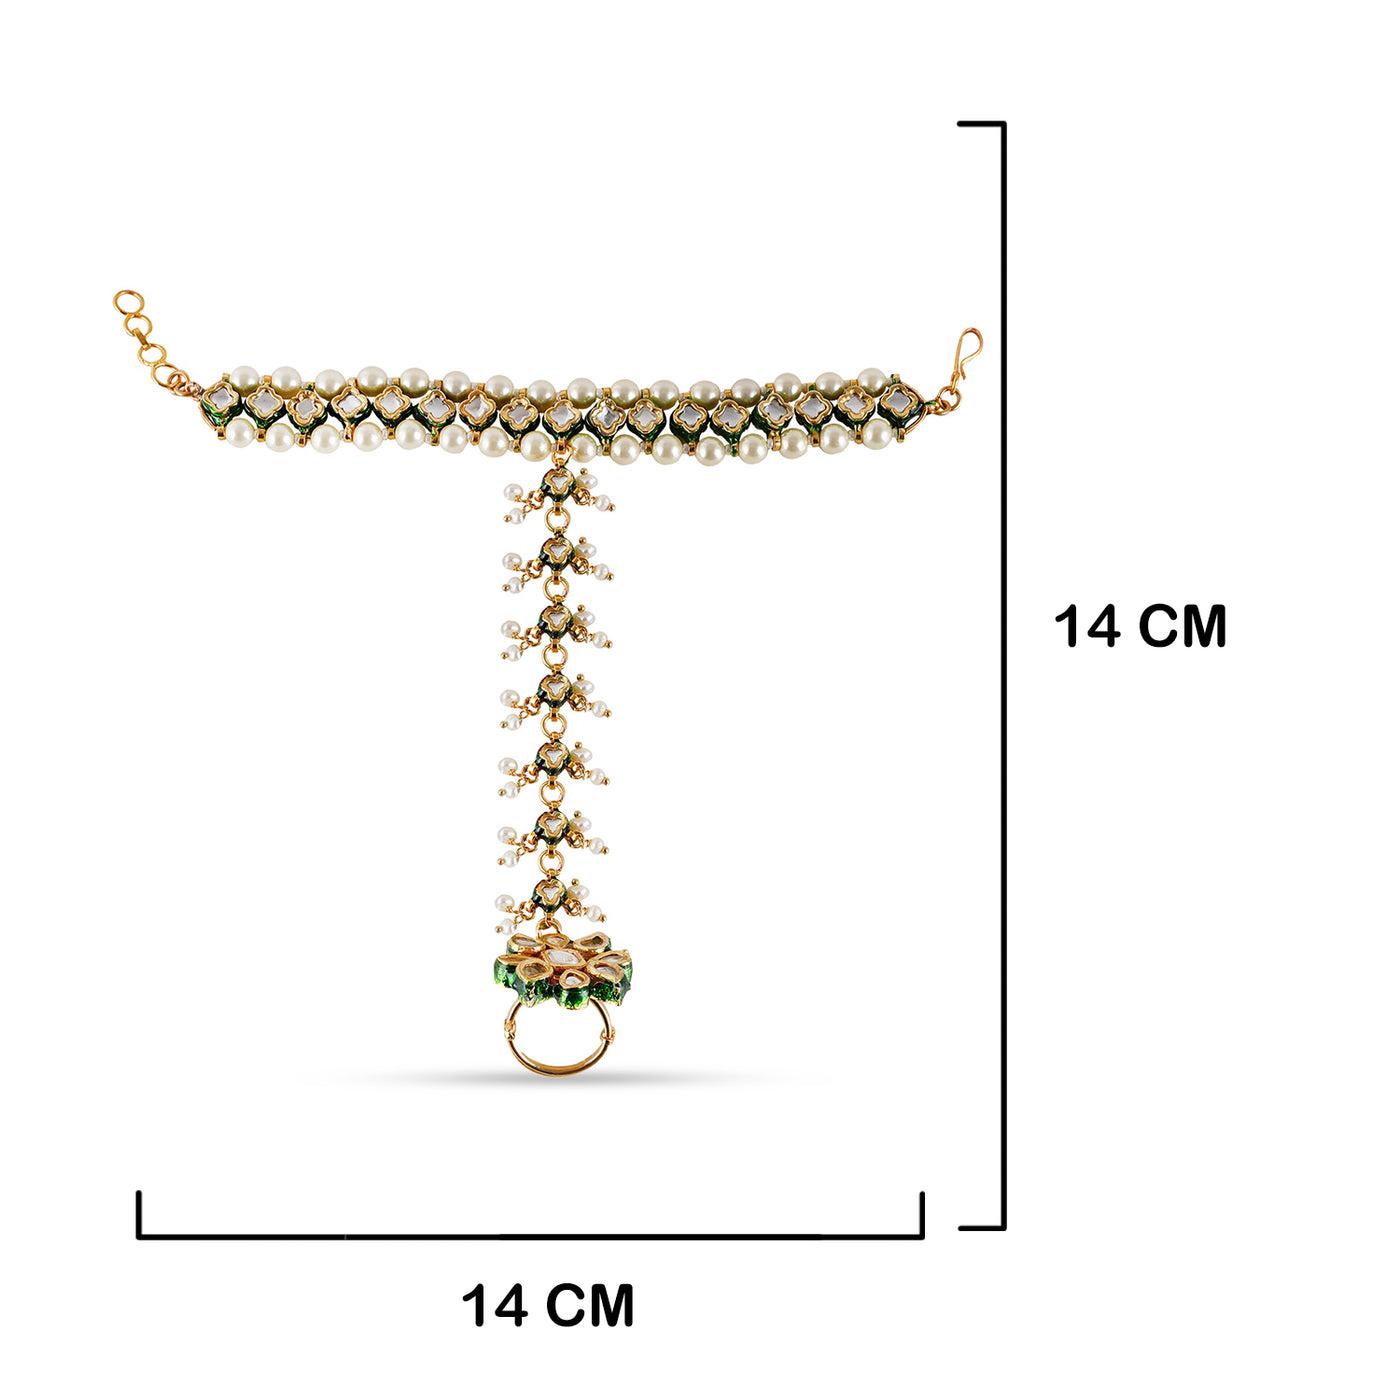 Kundan and Pearl Haathphool with measurements in cm. 14cm by 14cm.